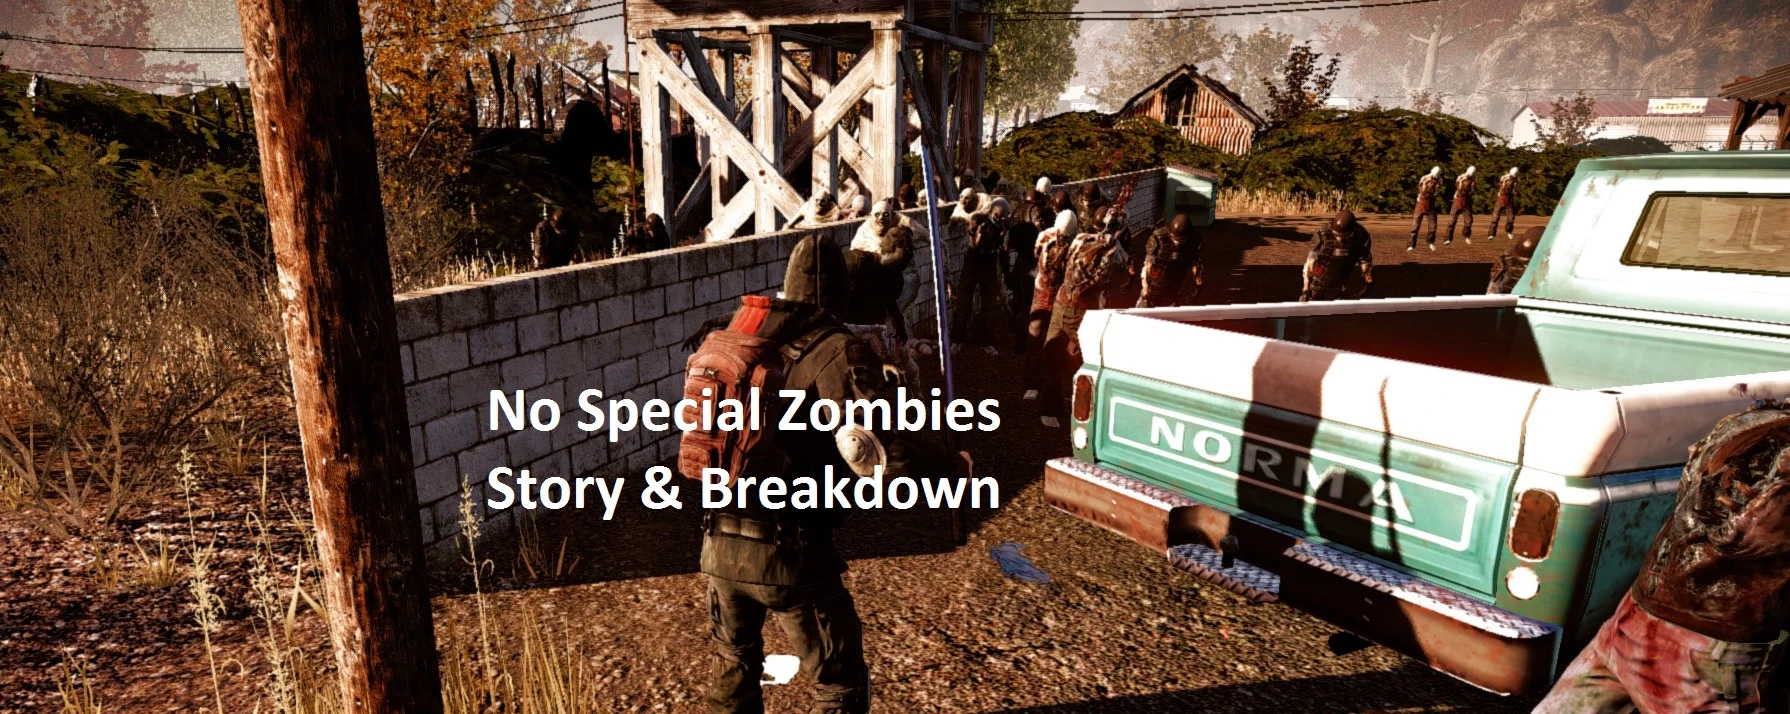 state of decay 2 slower zombies mod